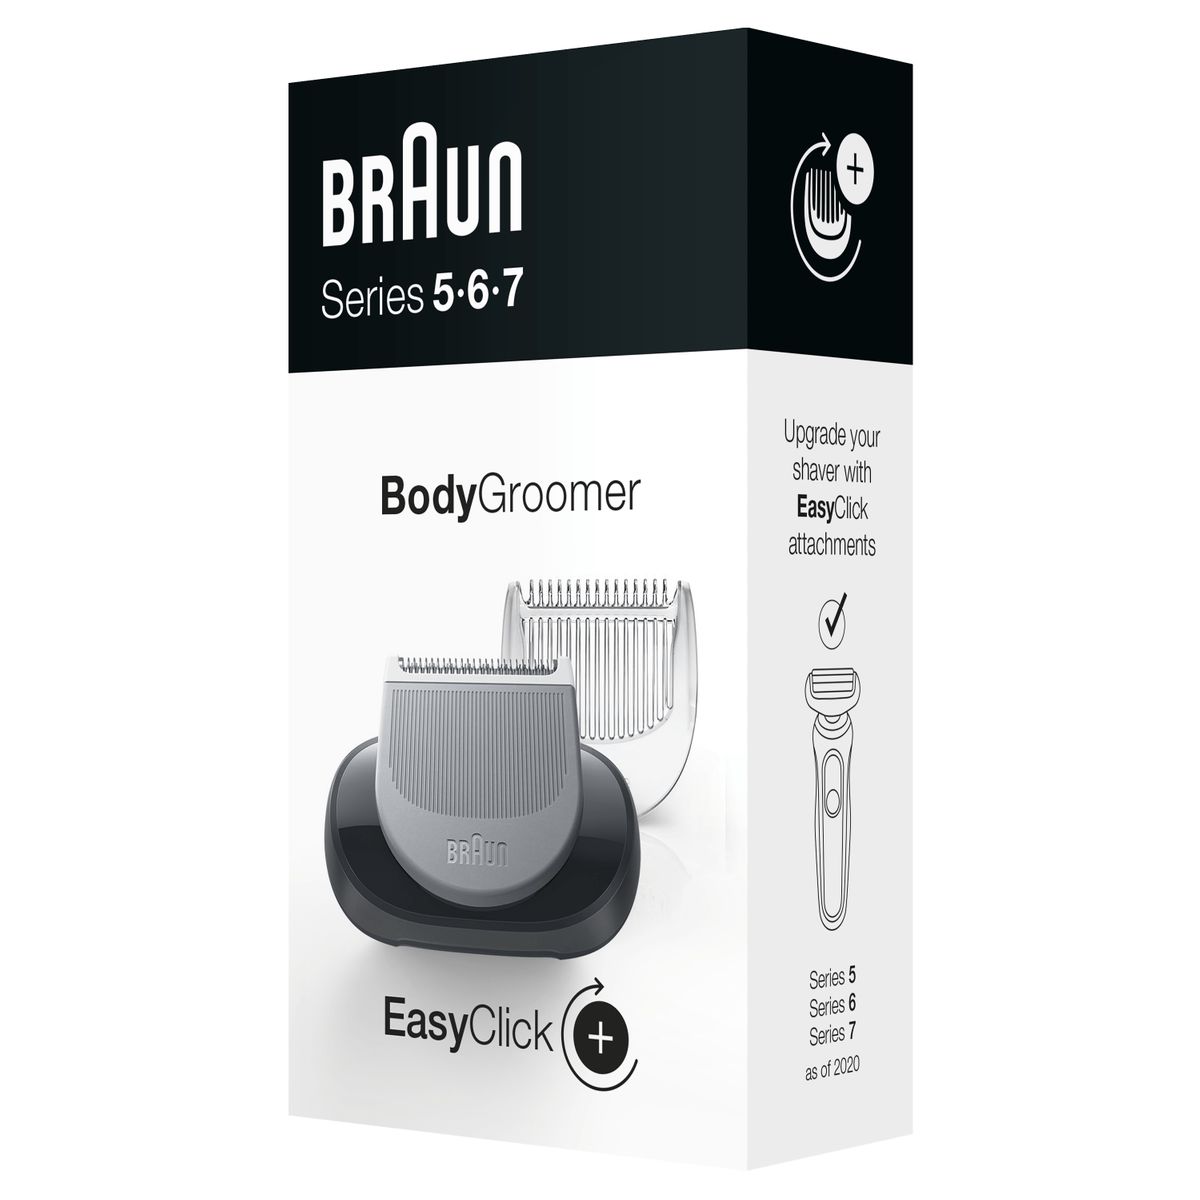 Braun EasyClick Bodygroomer attachment for shaver men, compatible with Series 5, 6 and 7 electric shavers (shaver models from 2020) Bodygroomer Single